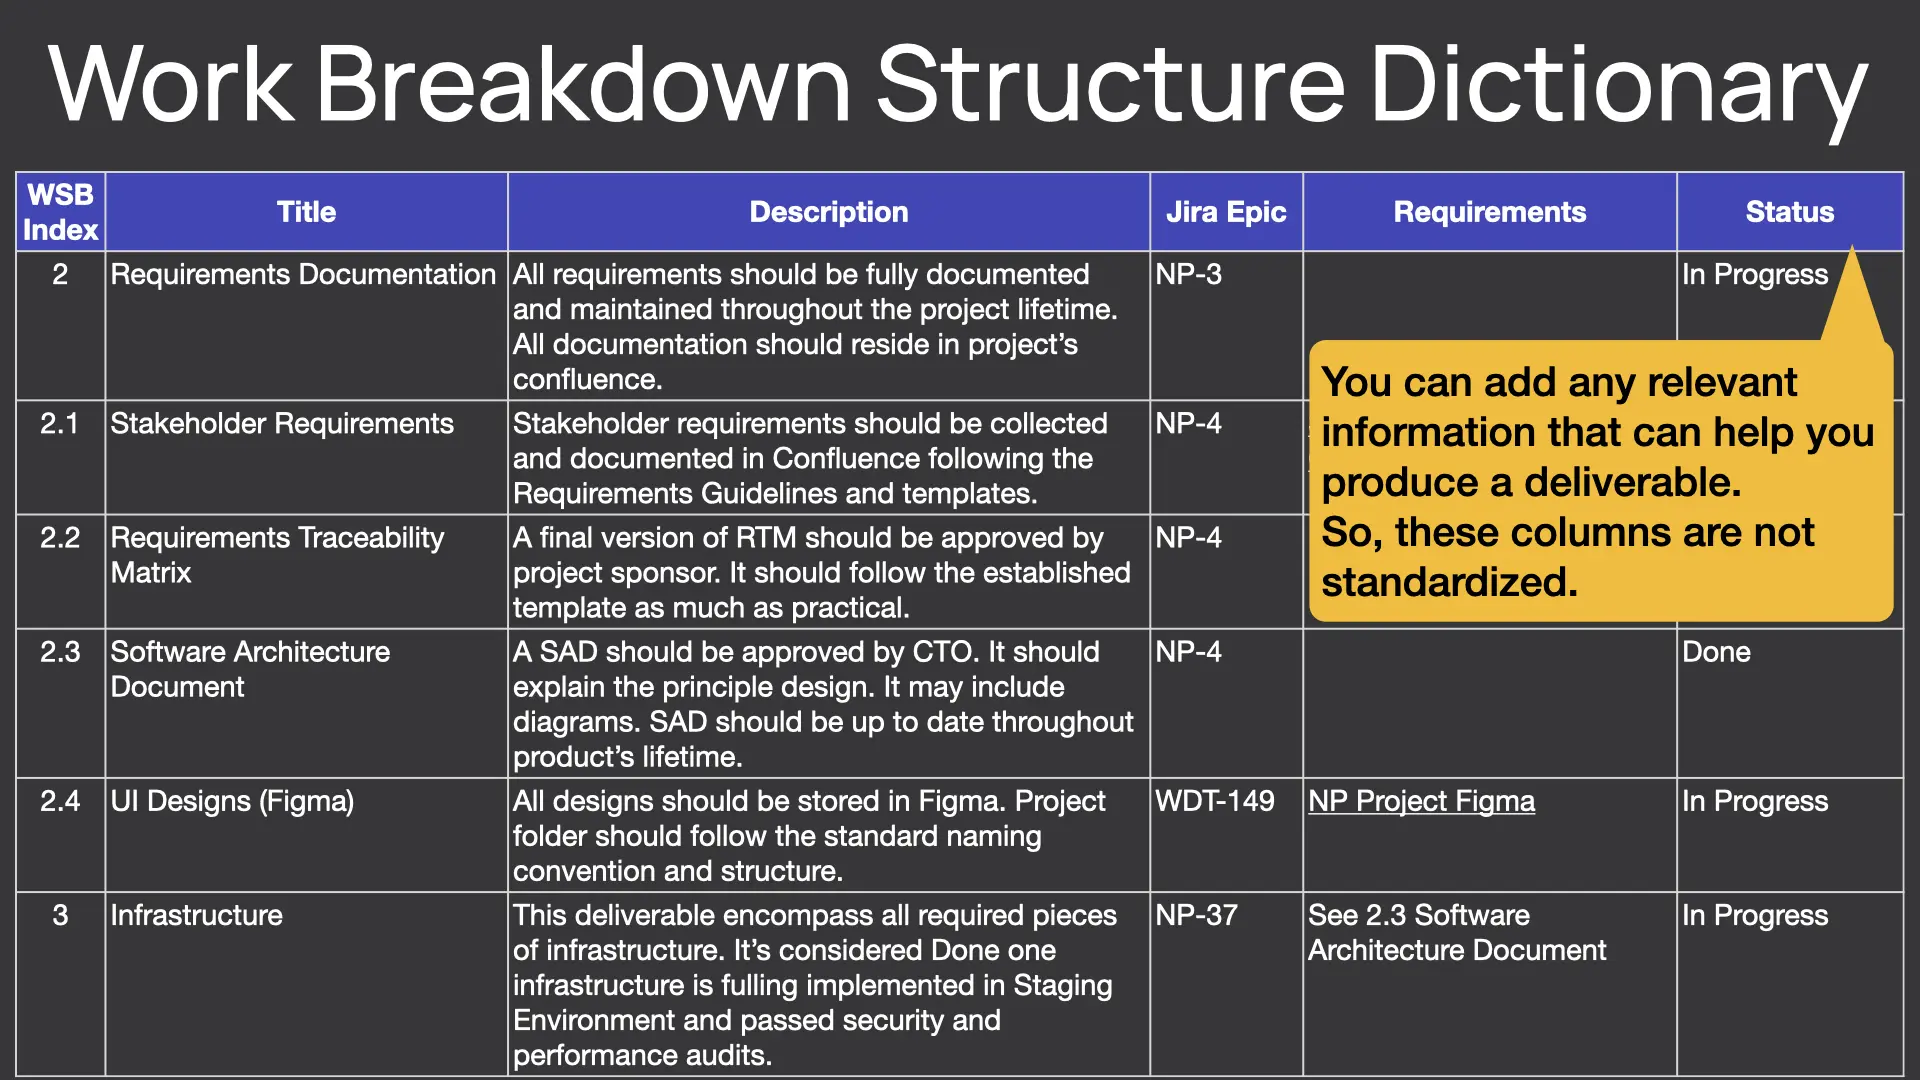 Example of the work breakdown structure dictionary This WBS dictionary has WBS index title description Jira Epic Requirements and Status columns